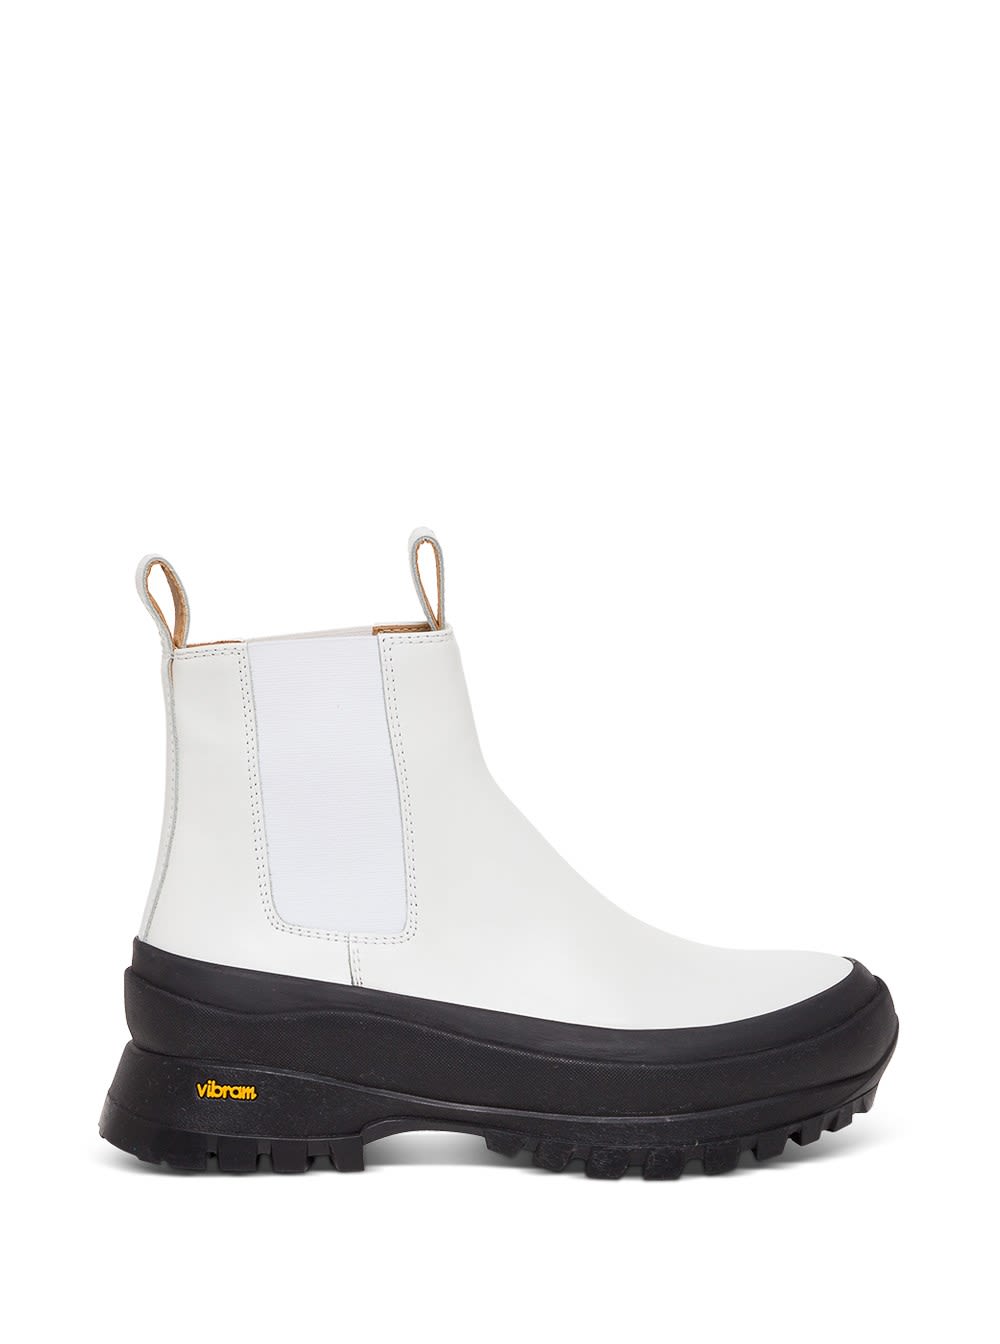 Buy Jil Sander Boston Ankle Boots In Leather With Vibram Sole online, shop Jil Sander shoes with free shipping